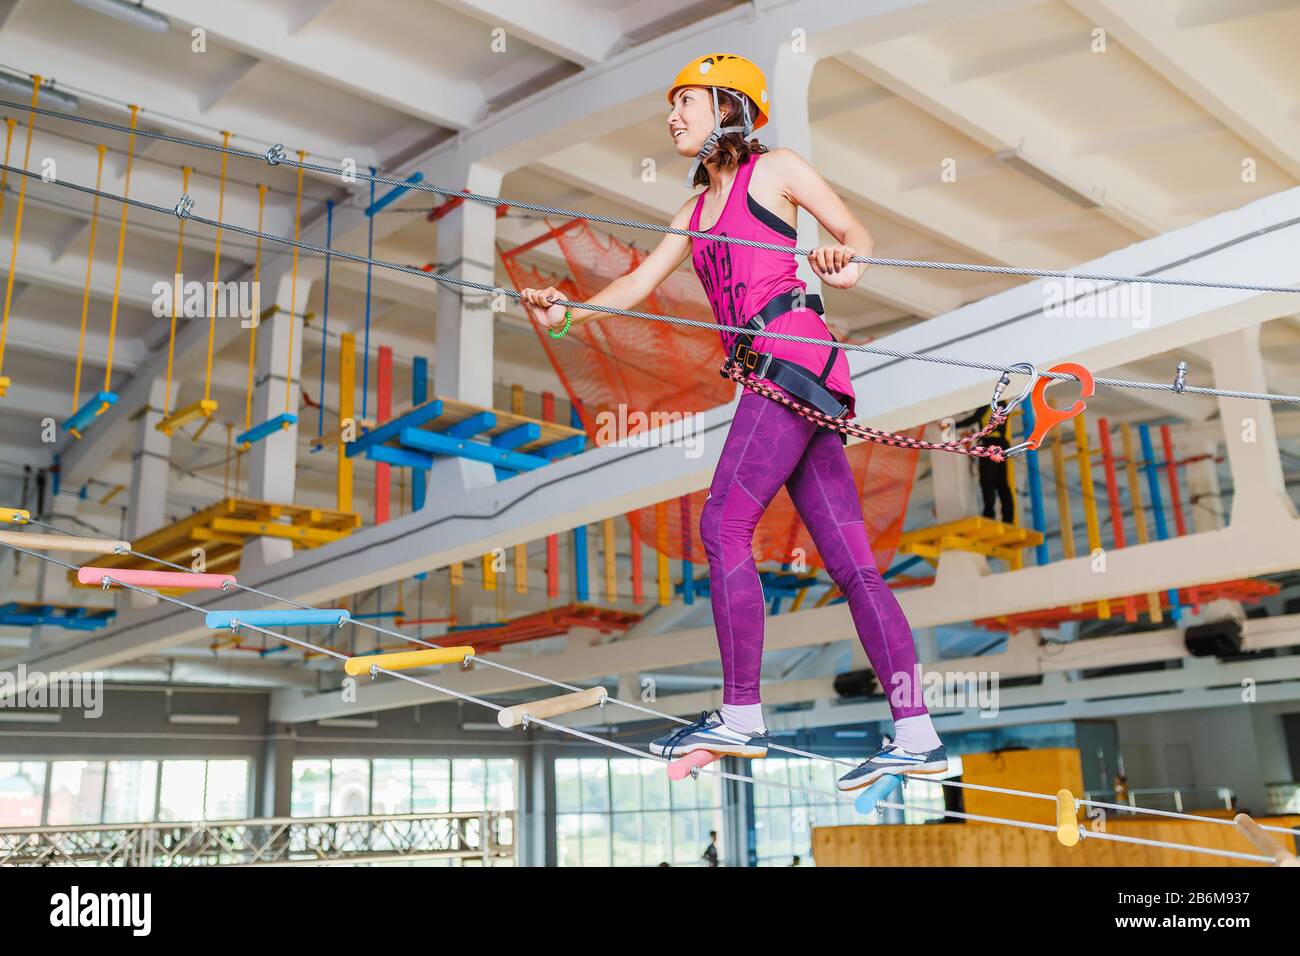 20 AUGUST 2017, UFA, RUSSIA, TRAMPOLINE CENTER 'FLYPARK': Young woman walking on a ladder in rope park gym indoors Stock Photo